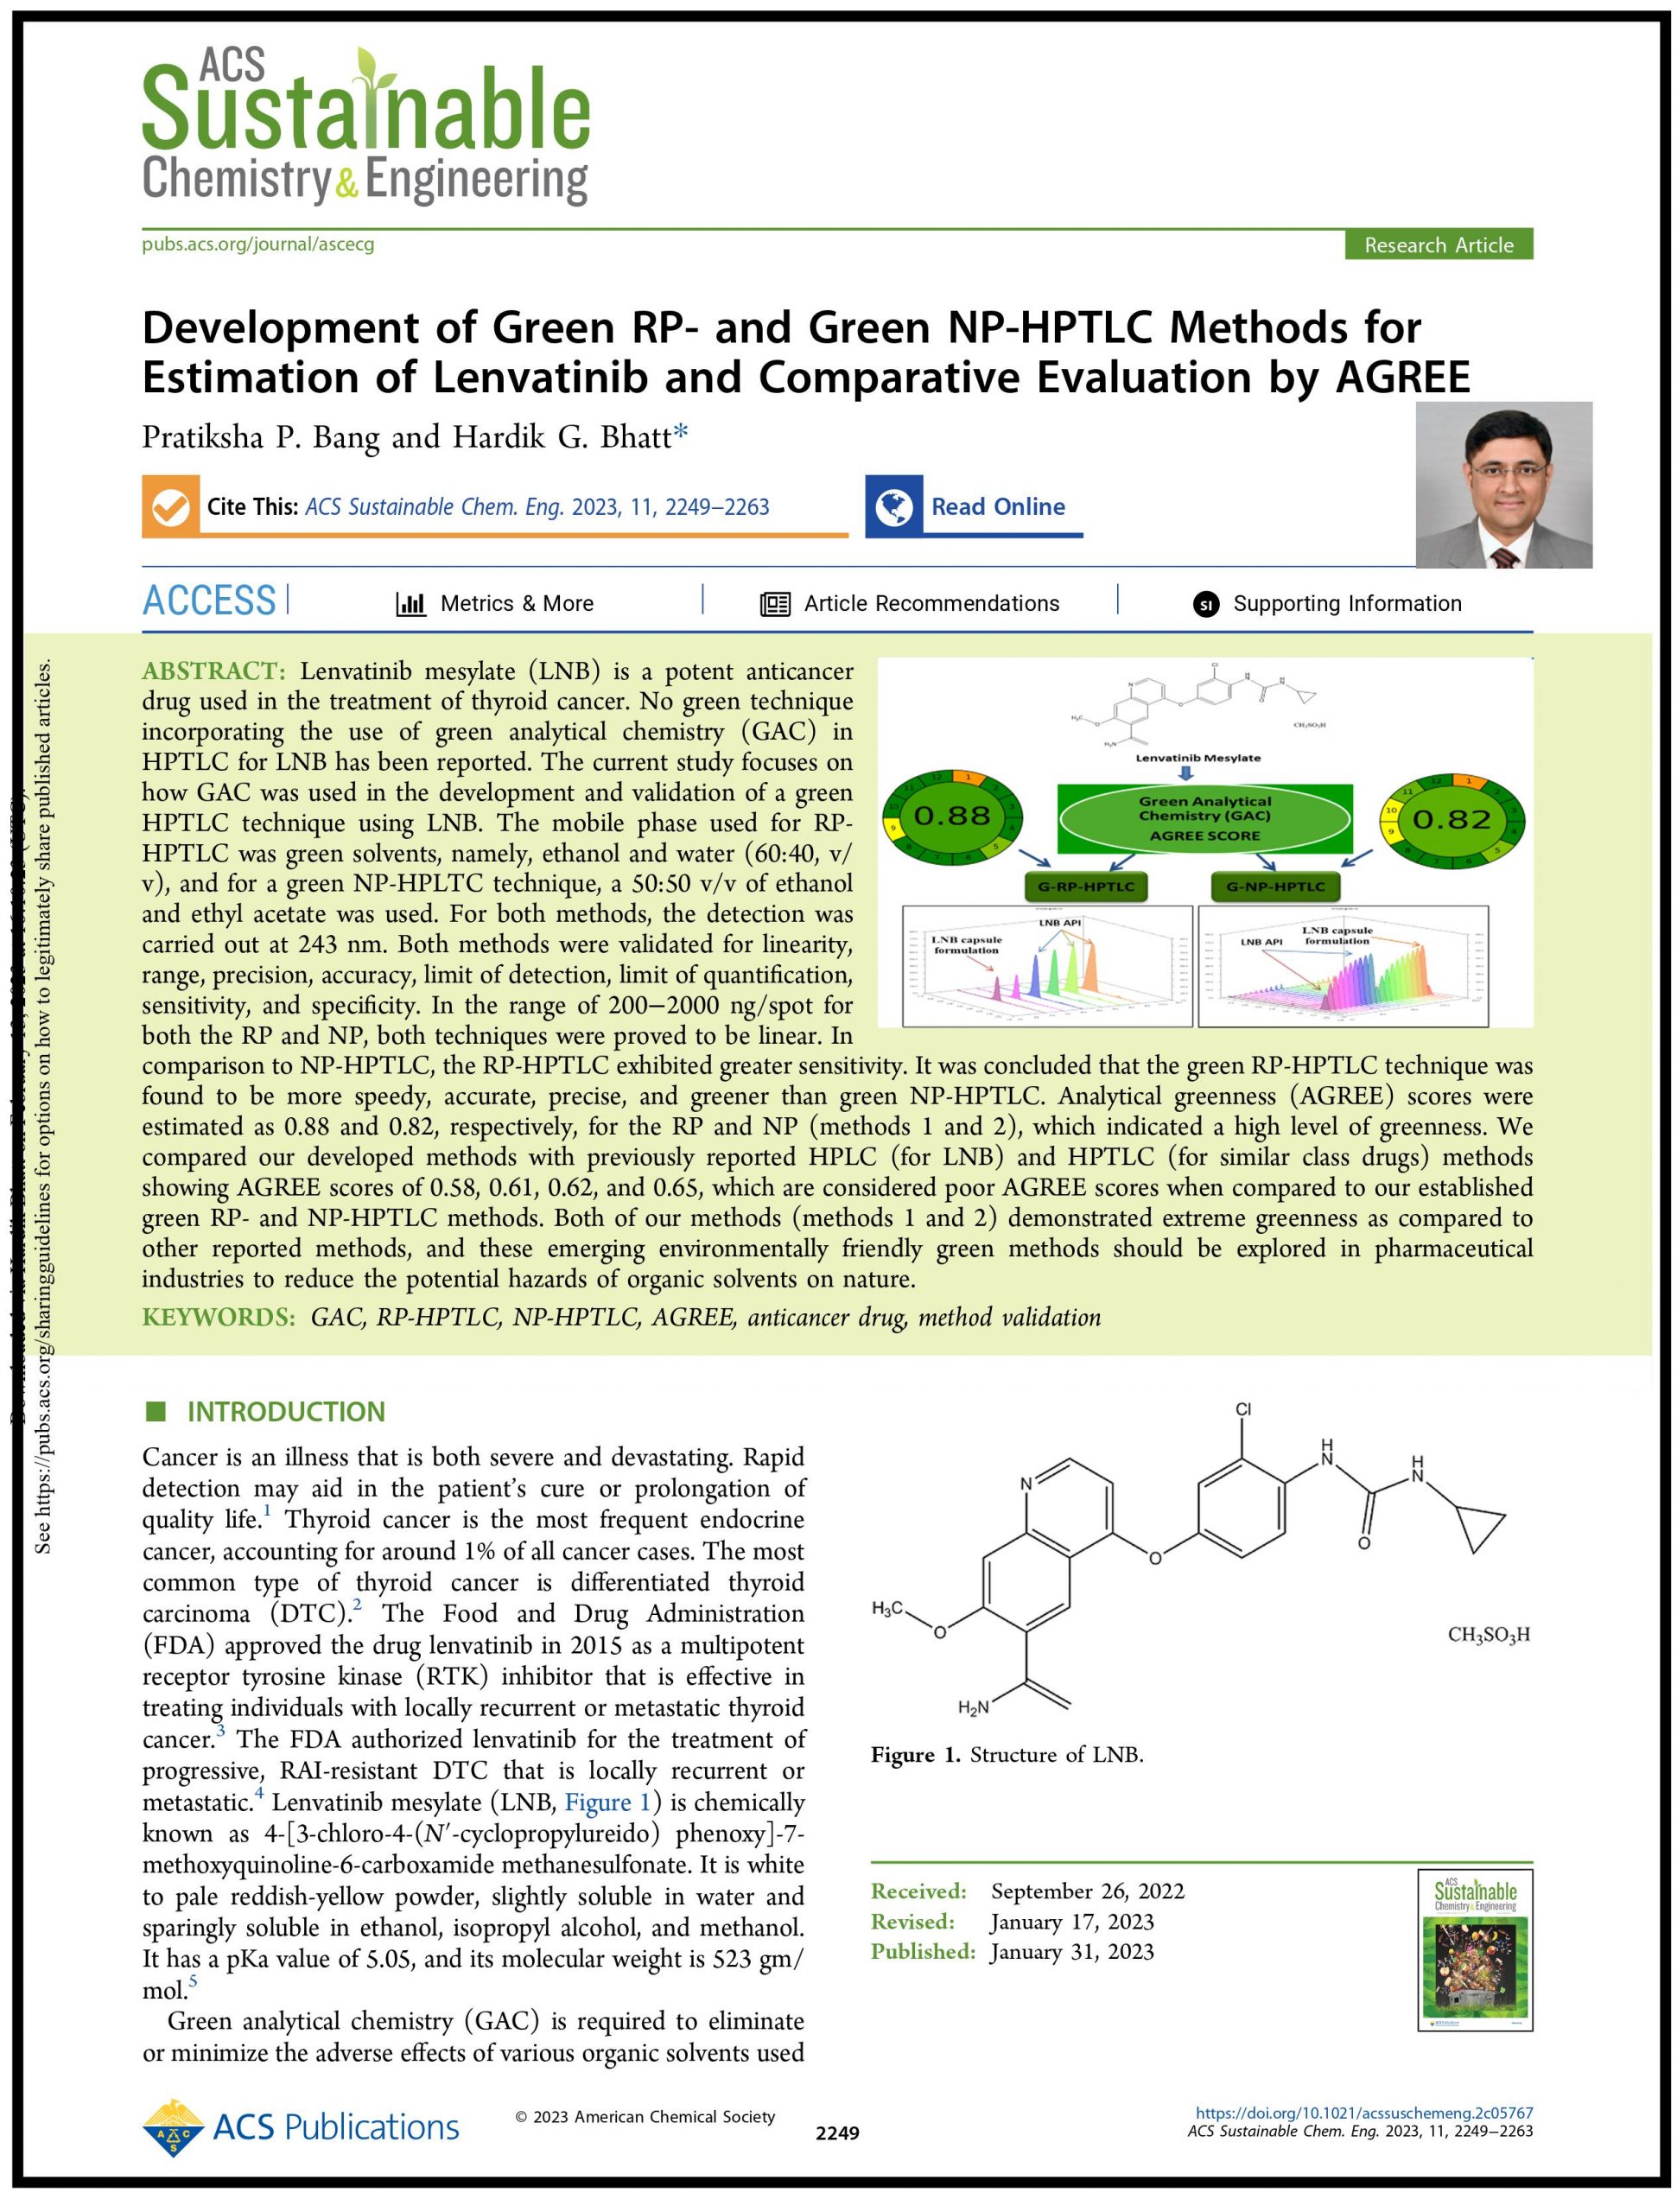 Development of Green RP- and Green NP-HPTLC Methods for Estimation of Lenvatinib and Comparative Evaluation by AGREE